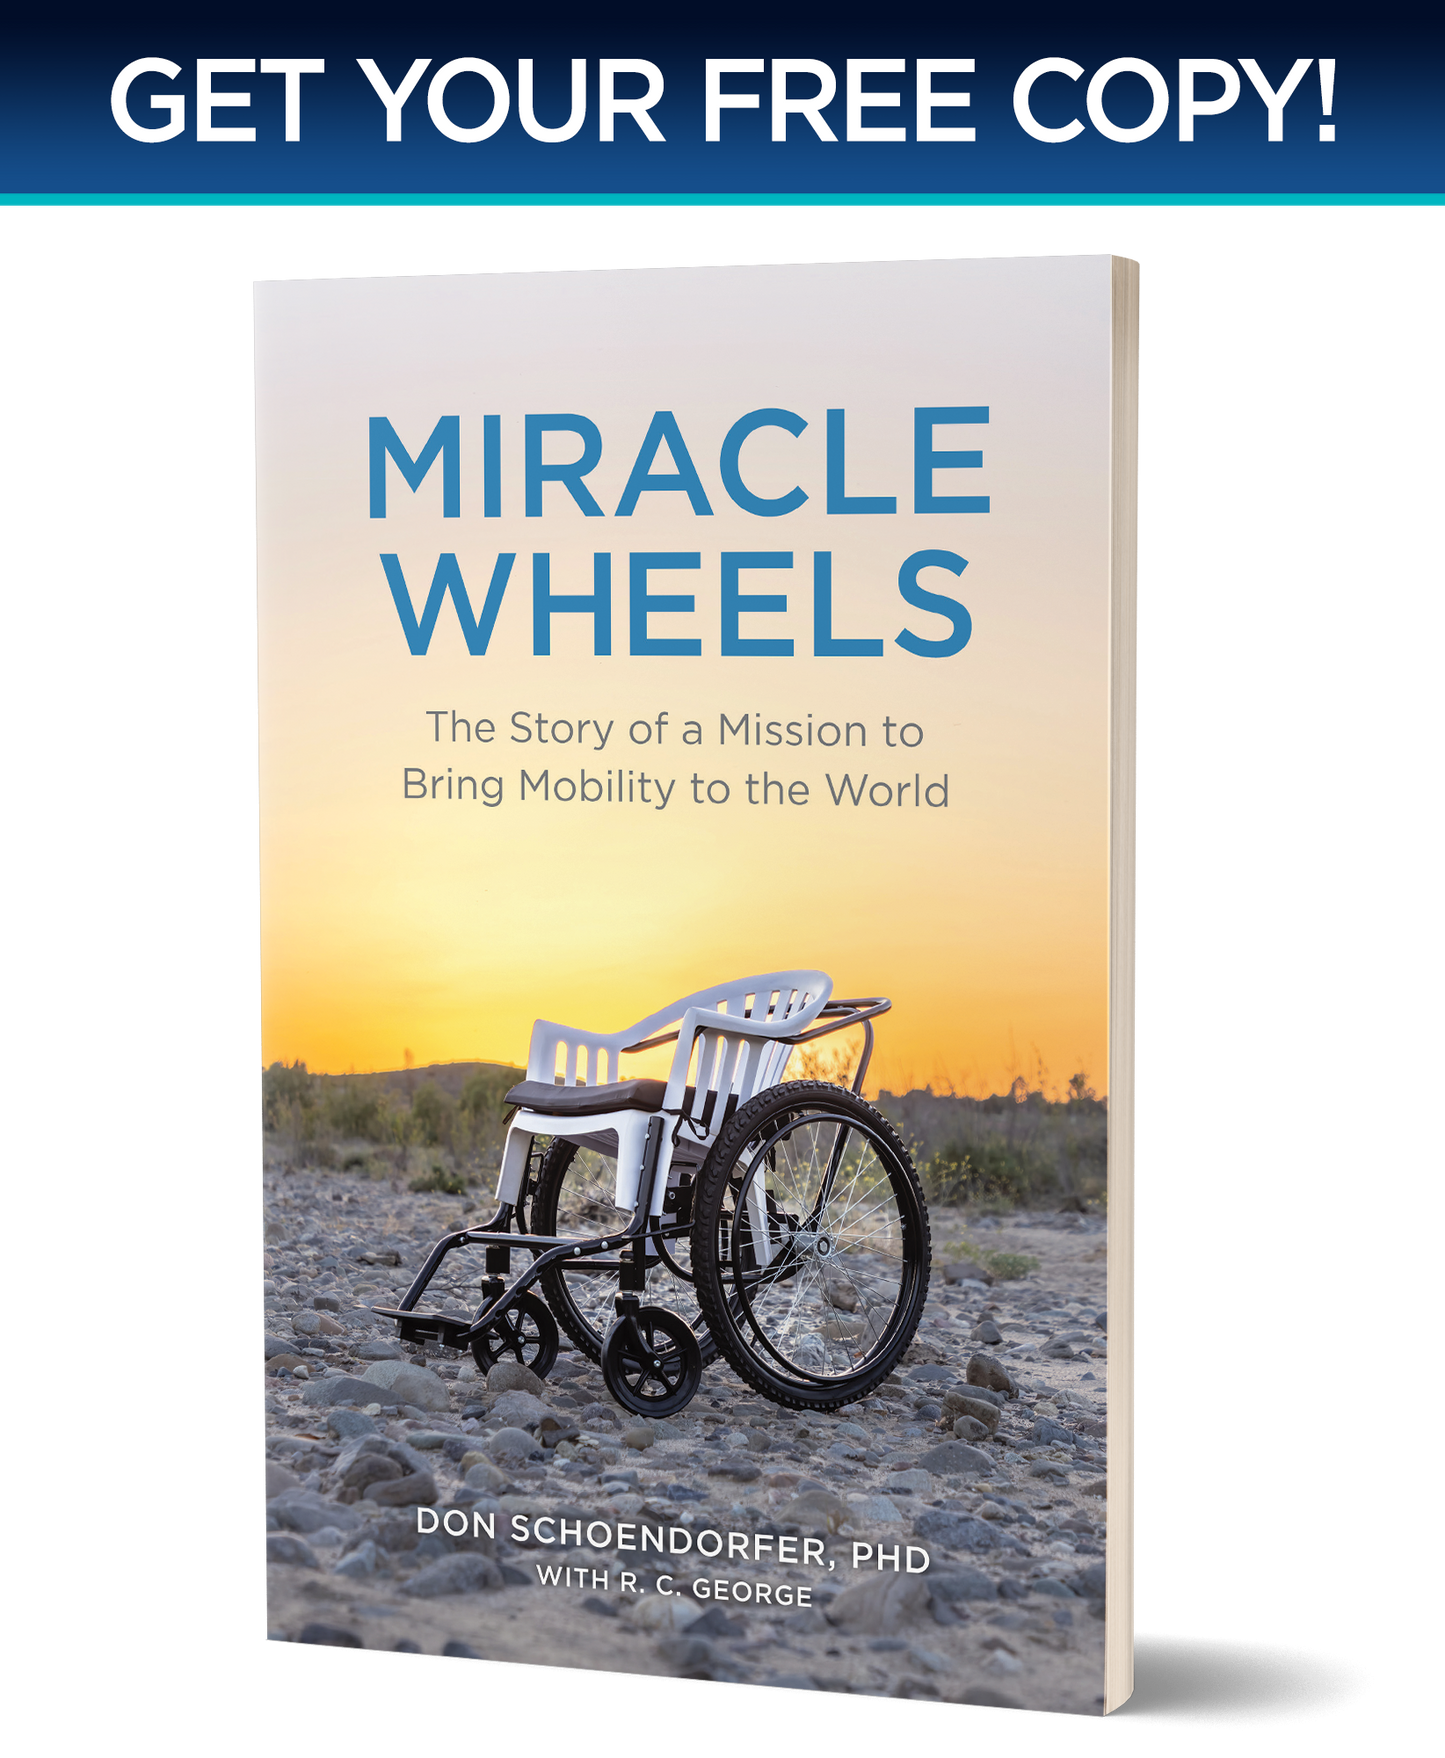 Miracle Wheels - Free with Donation!